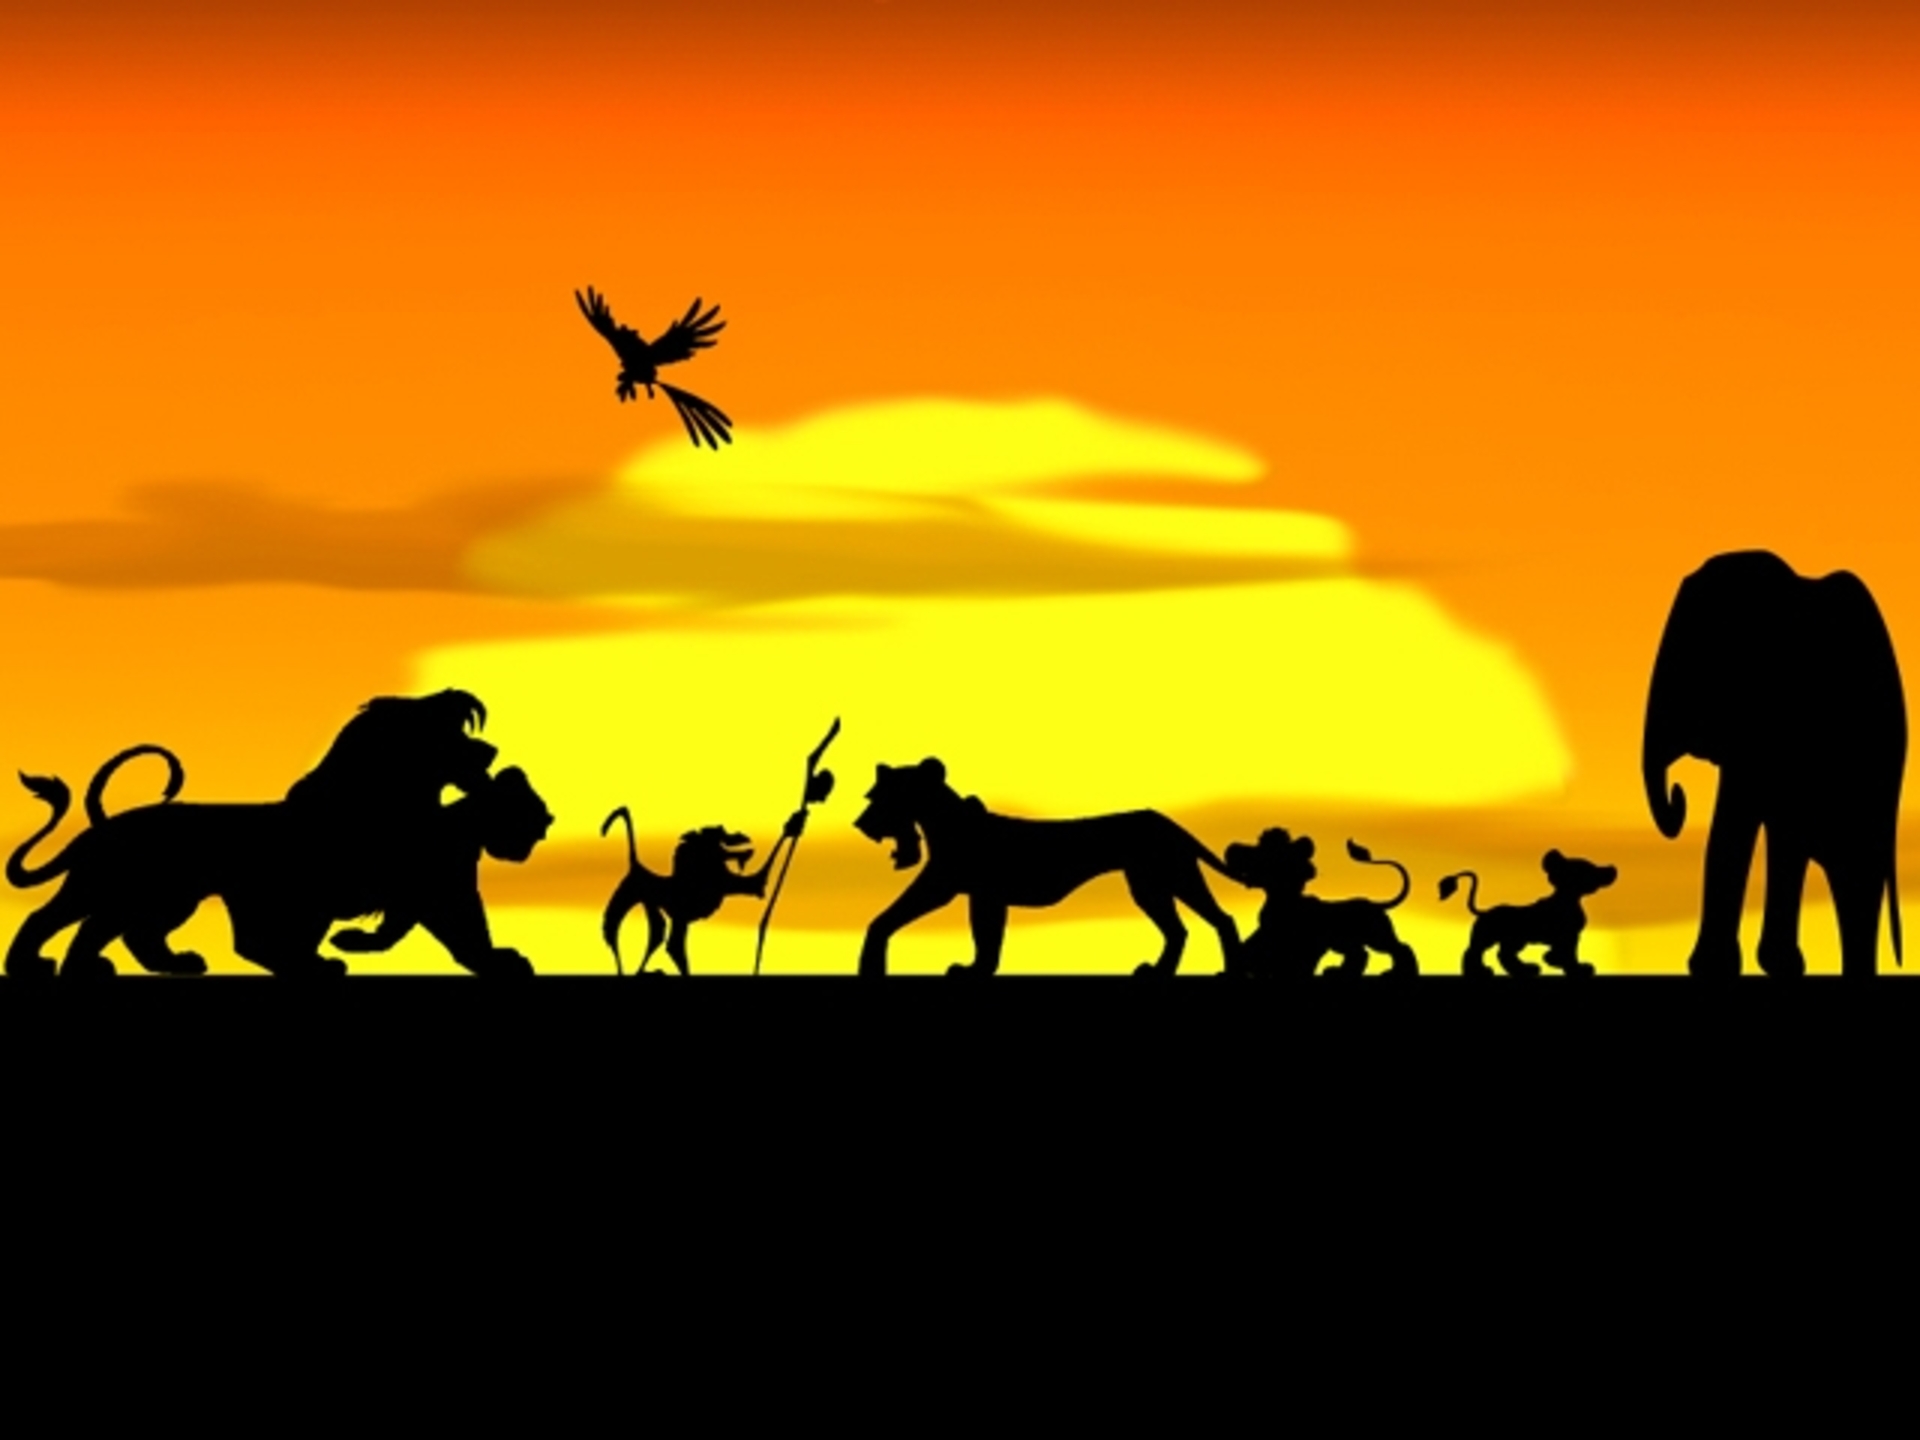 Sunset Disney Pany Silhouettes The Lion King Wallpaper